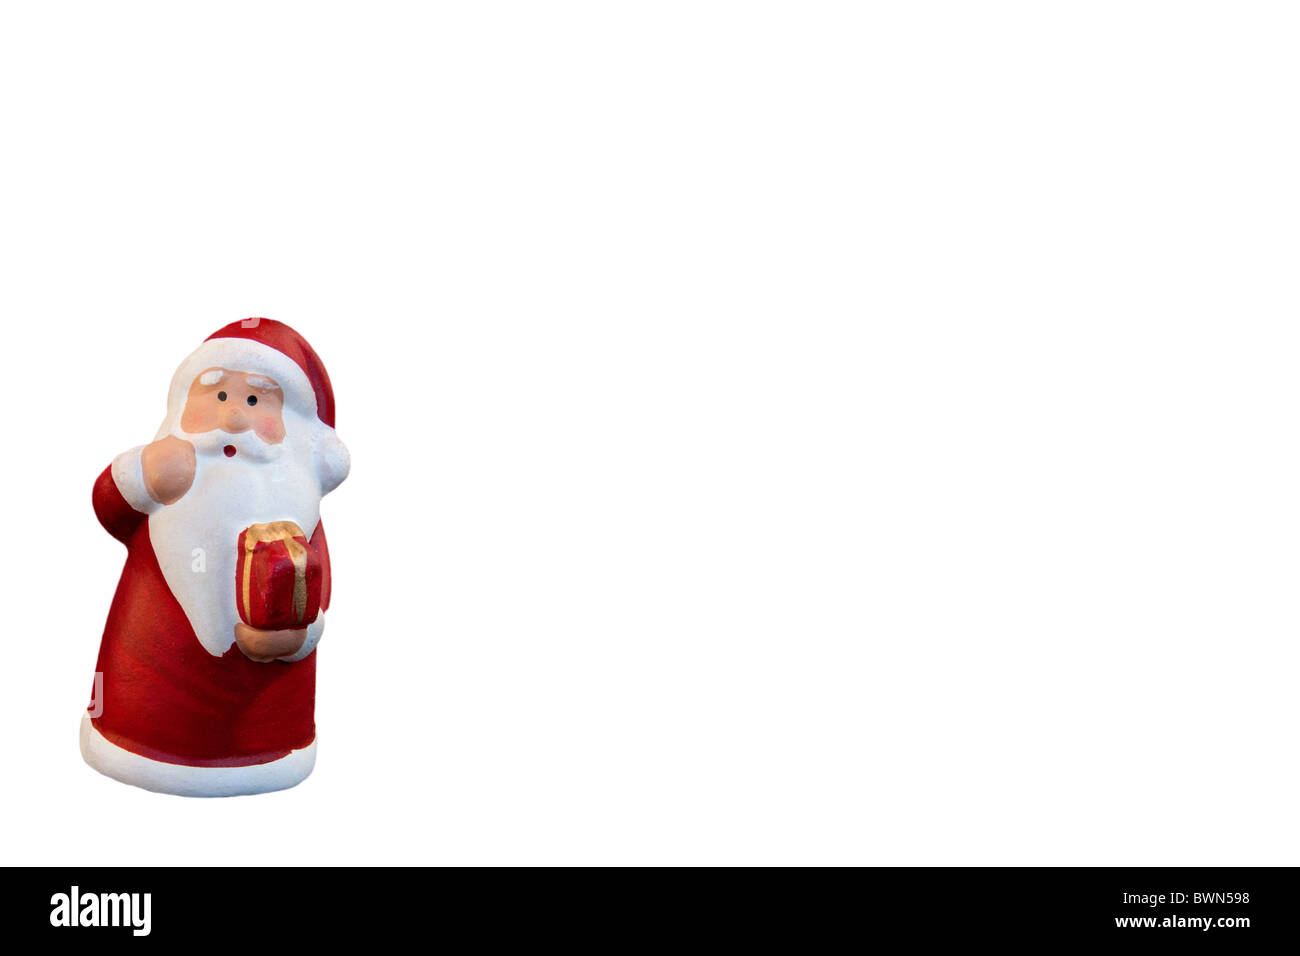 Santa Claus as a isolated object Stock Photo